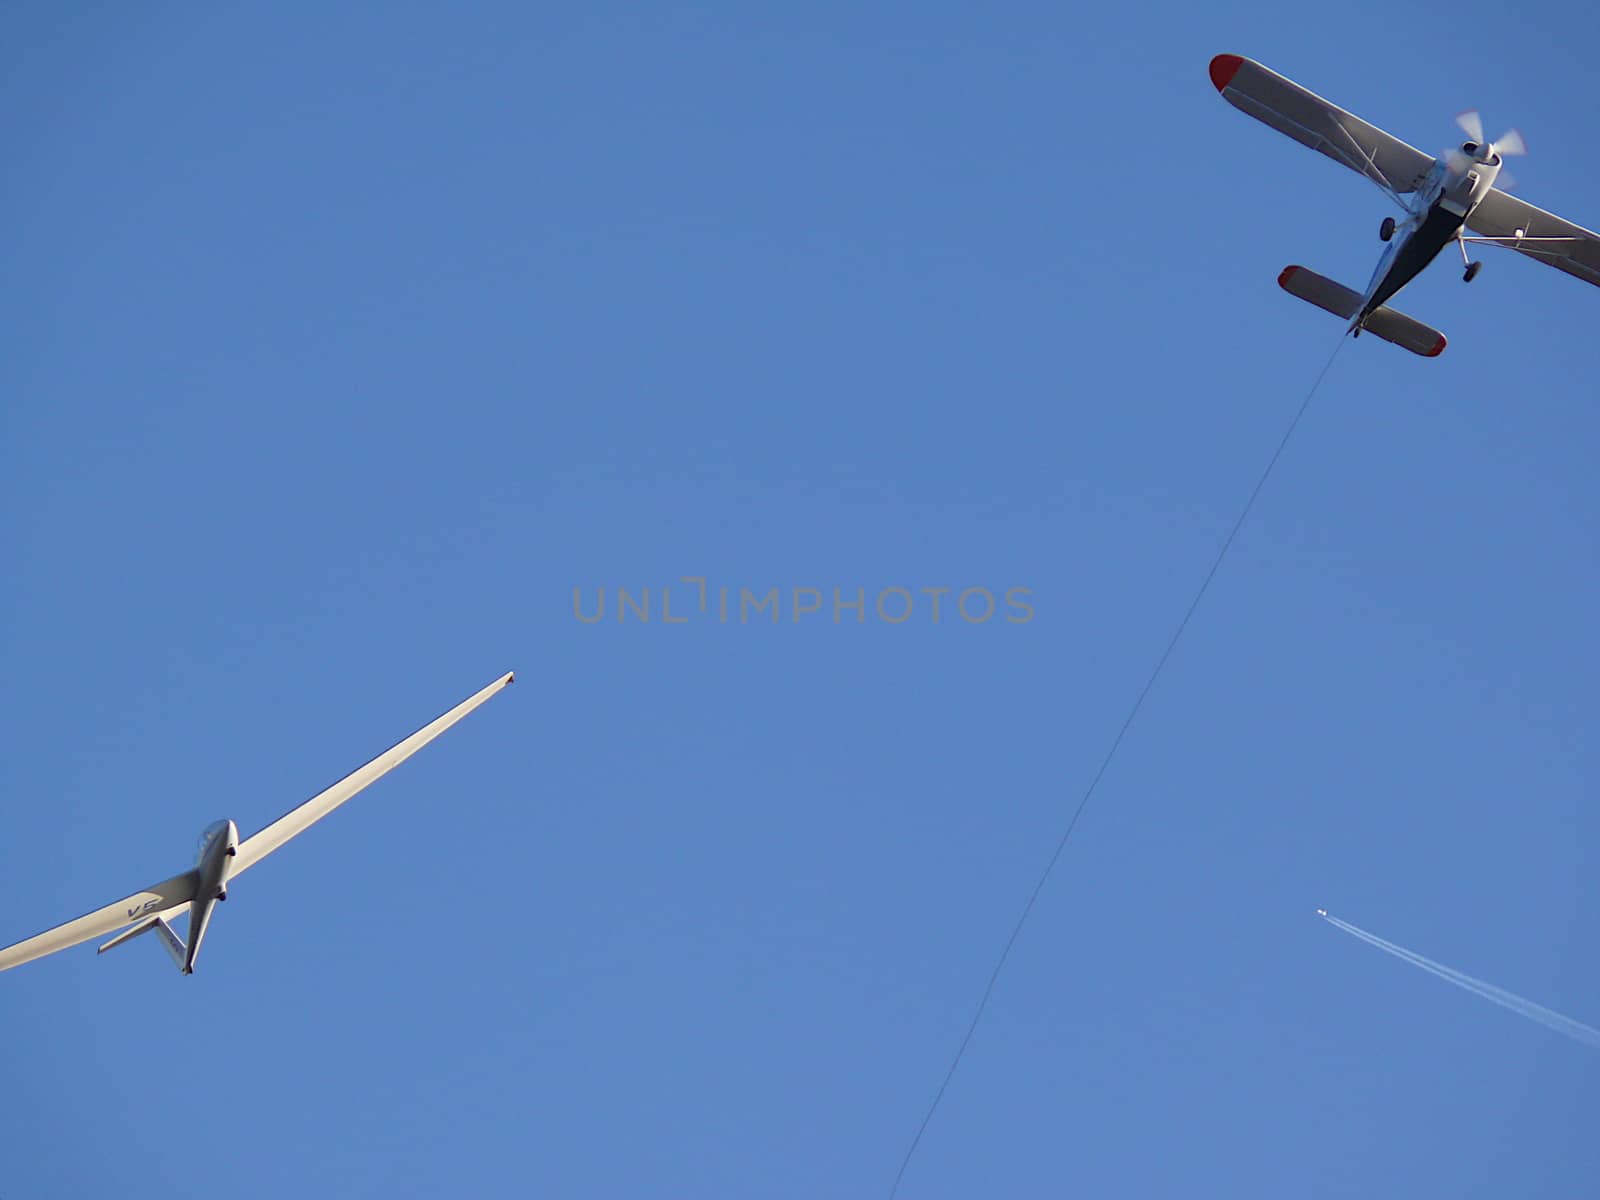 Glider pulled by a motorized plane. Glider airplane stands out f by Paolo_Grassi